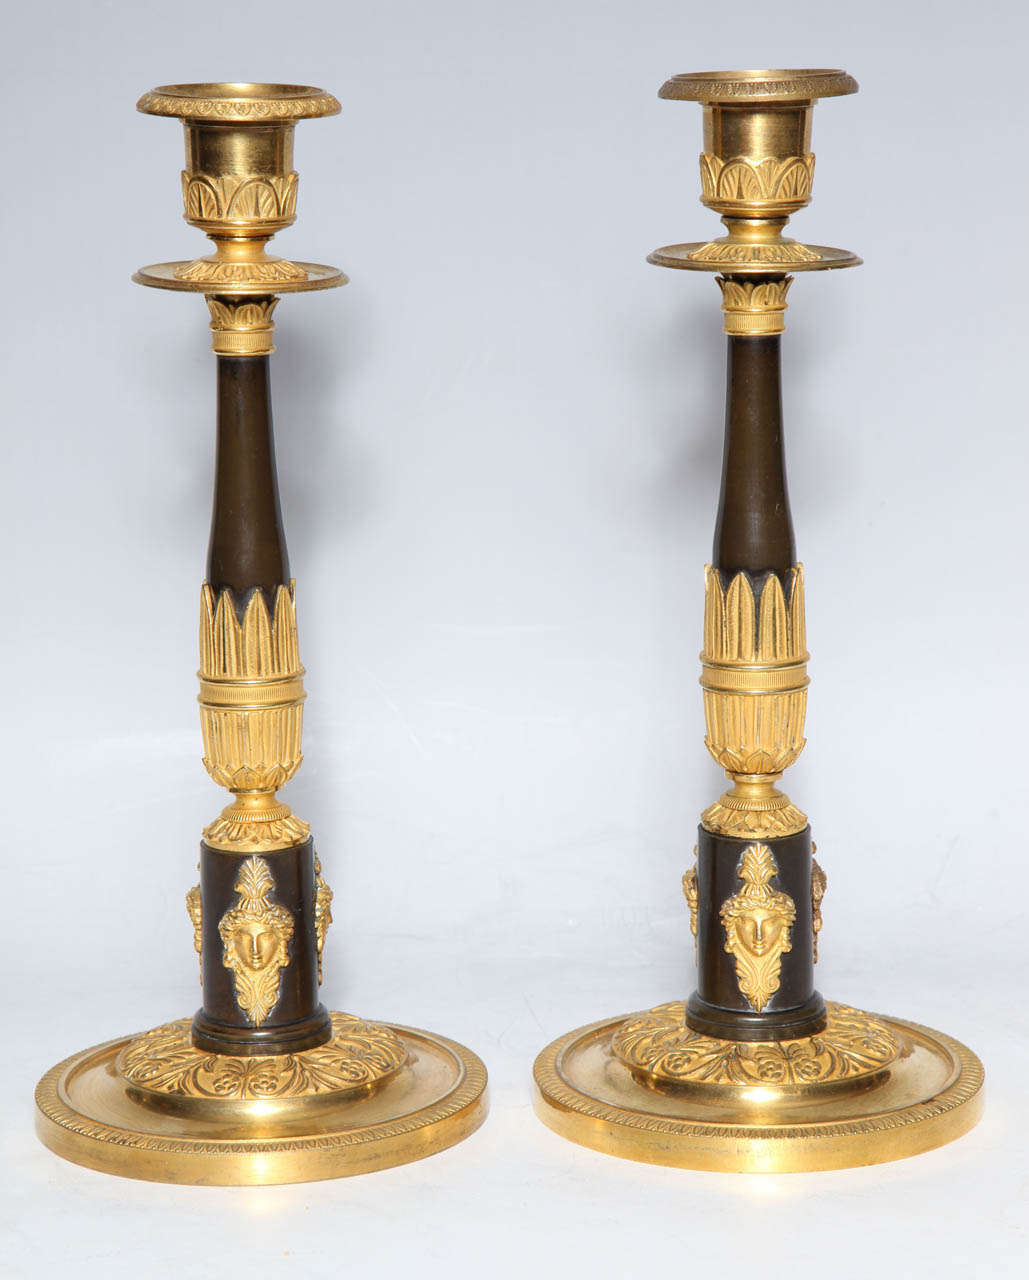 A Very Fine pair of Antique Russian, Empire Period, Two Tone Patinated and Dore Bronze Figural Single Light Candlesticks. Hand crafted from high quality Dore Bronze with exquisite gold detailing. These candlesticks are a fine example of the Empire